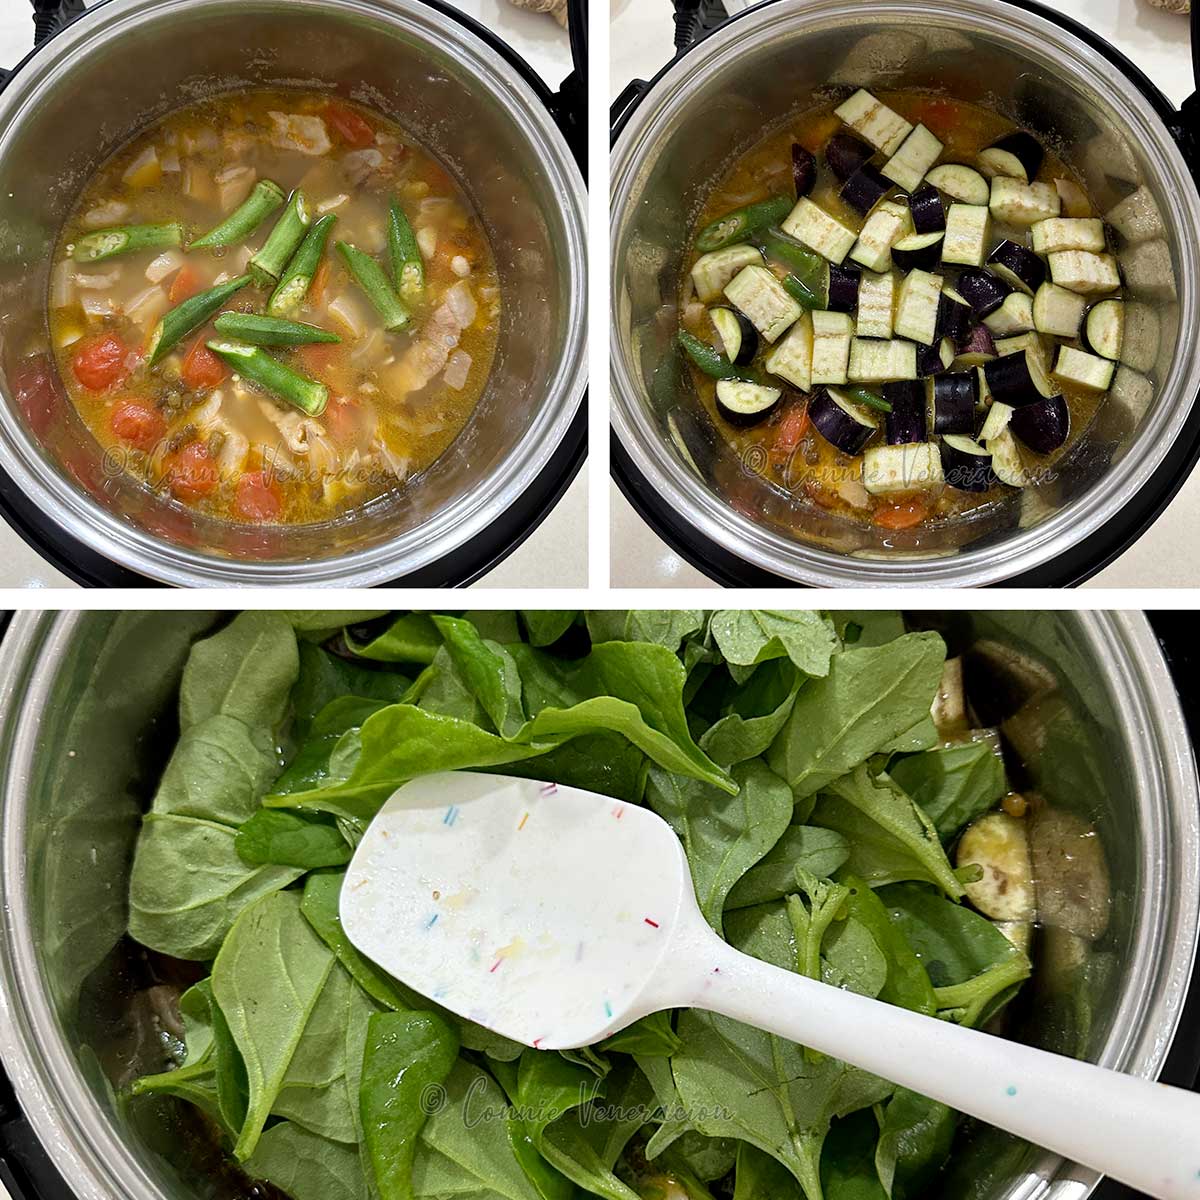 Adding okra, eggplants and spinach to pork and mung beans in slow cooker